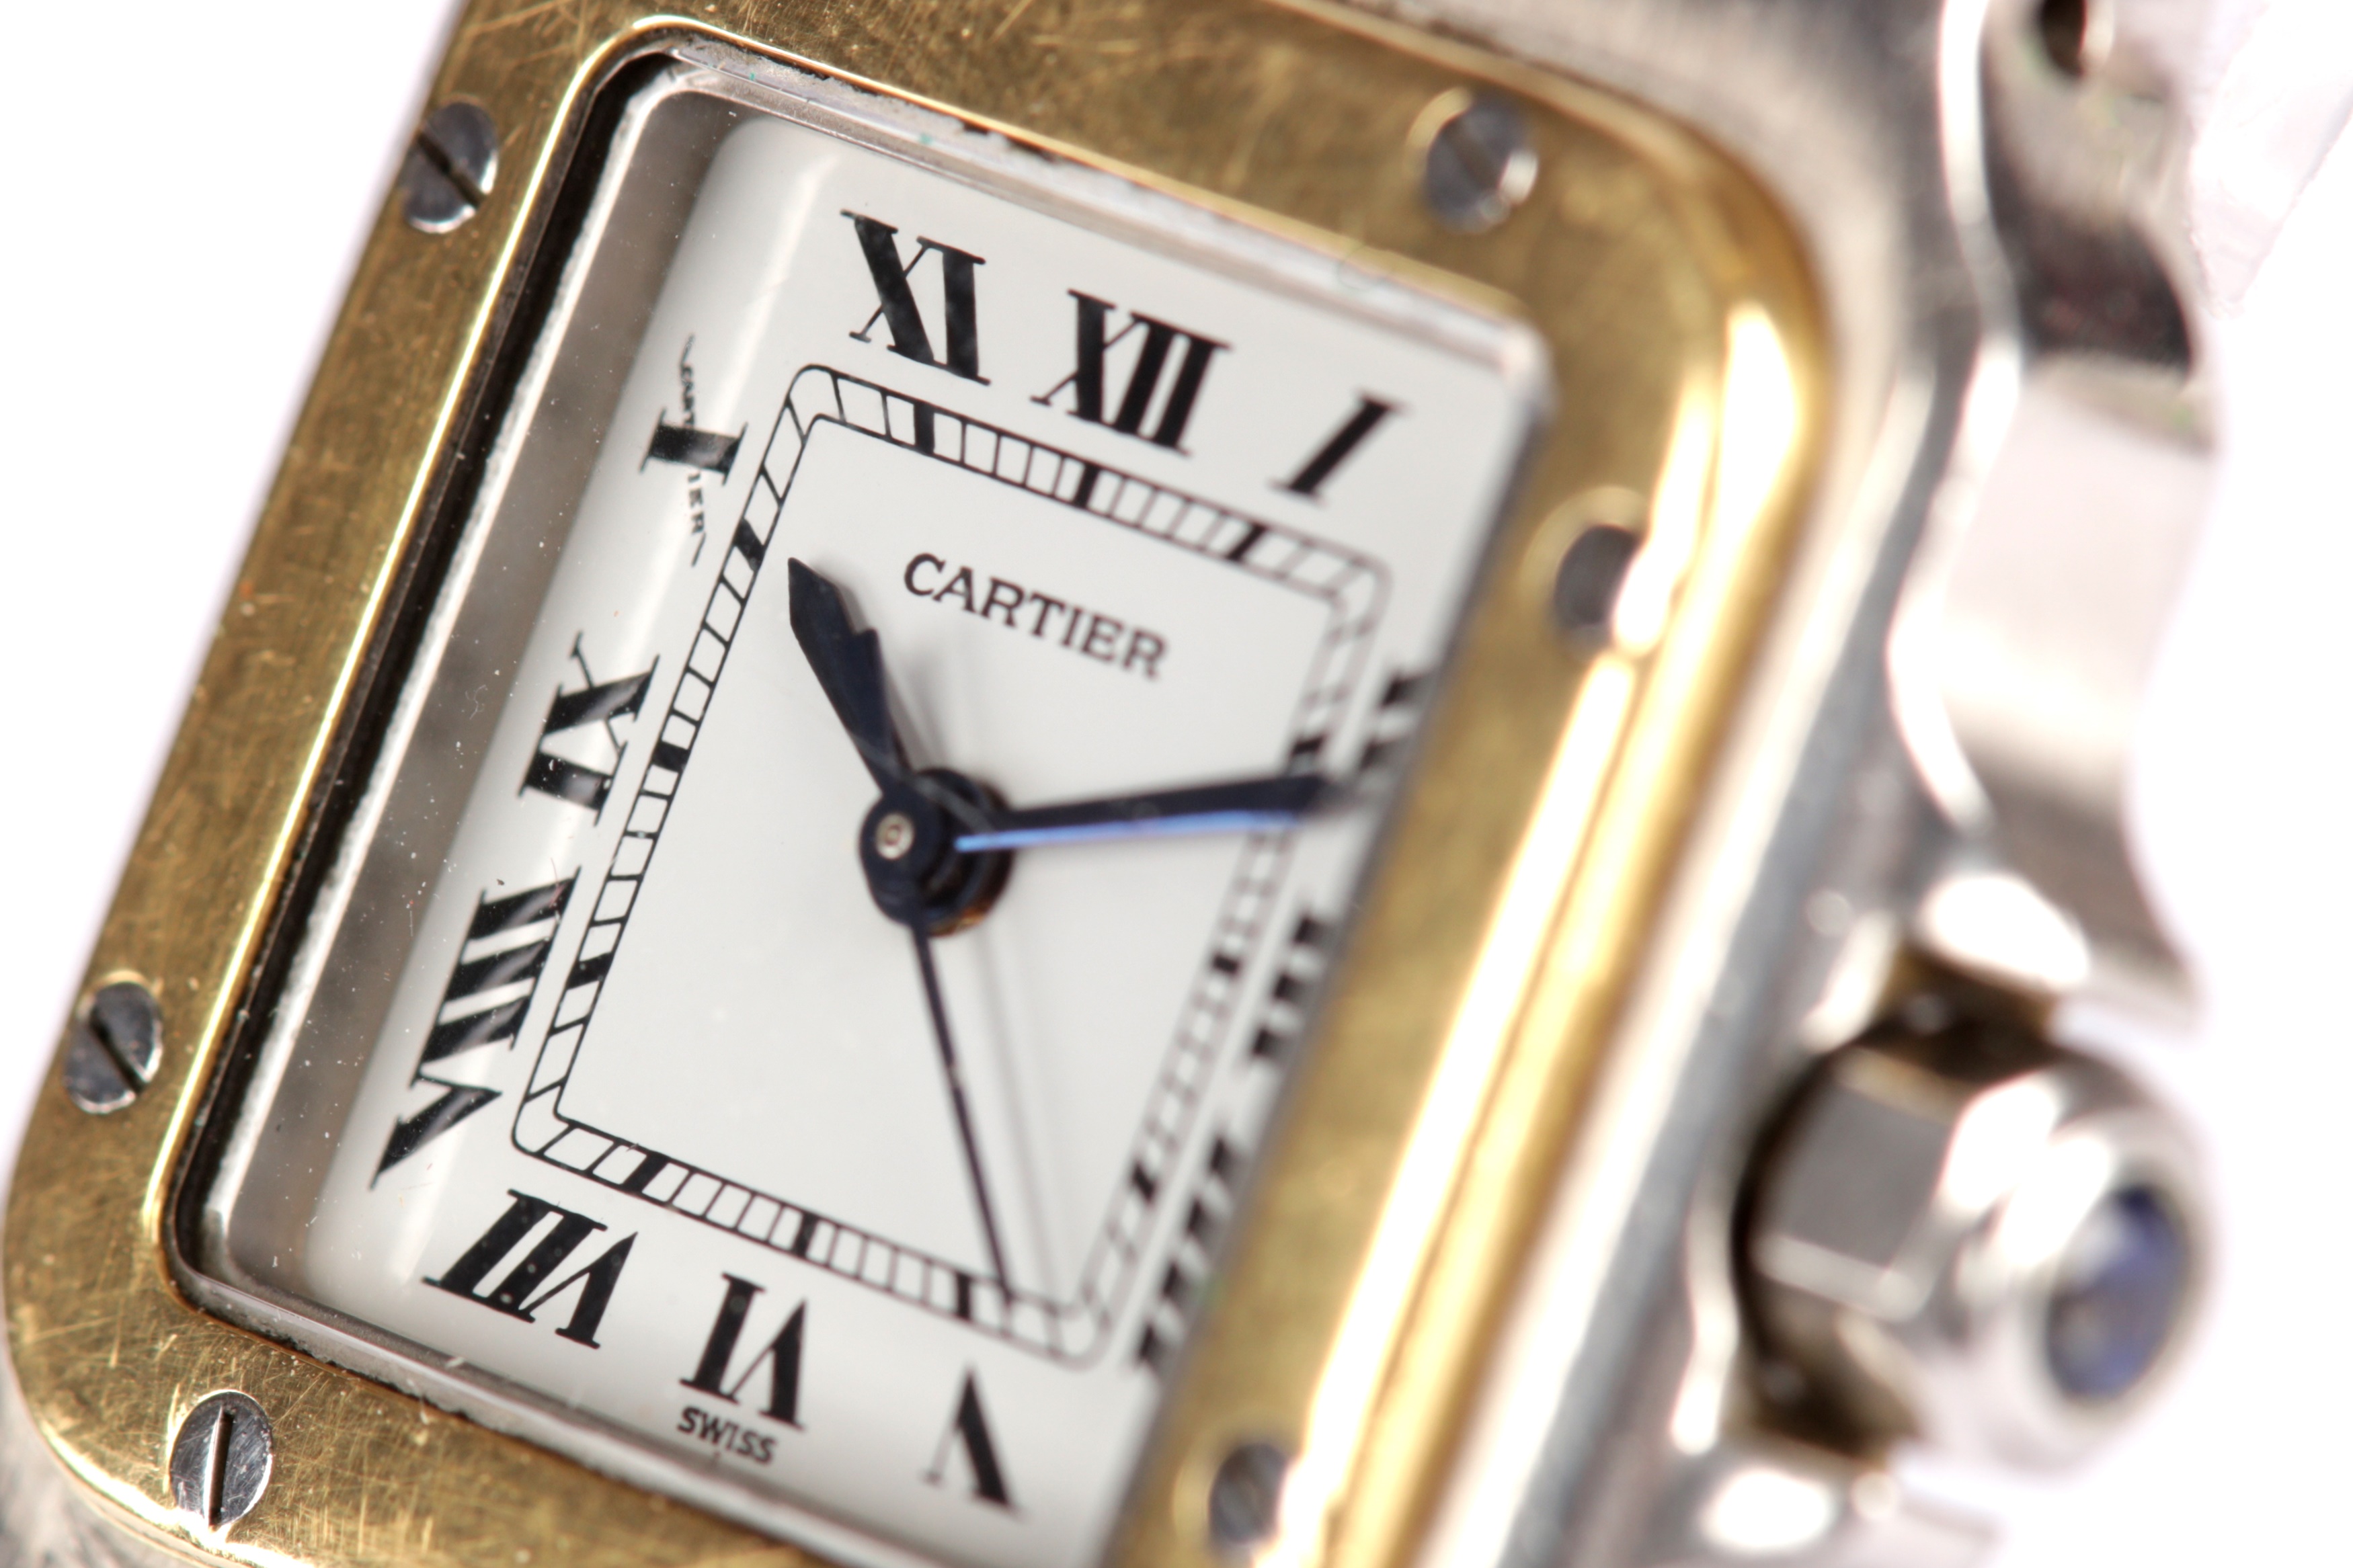 CARTIER. - Image 3 of 5